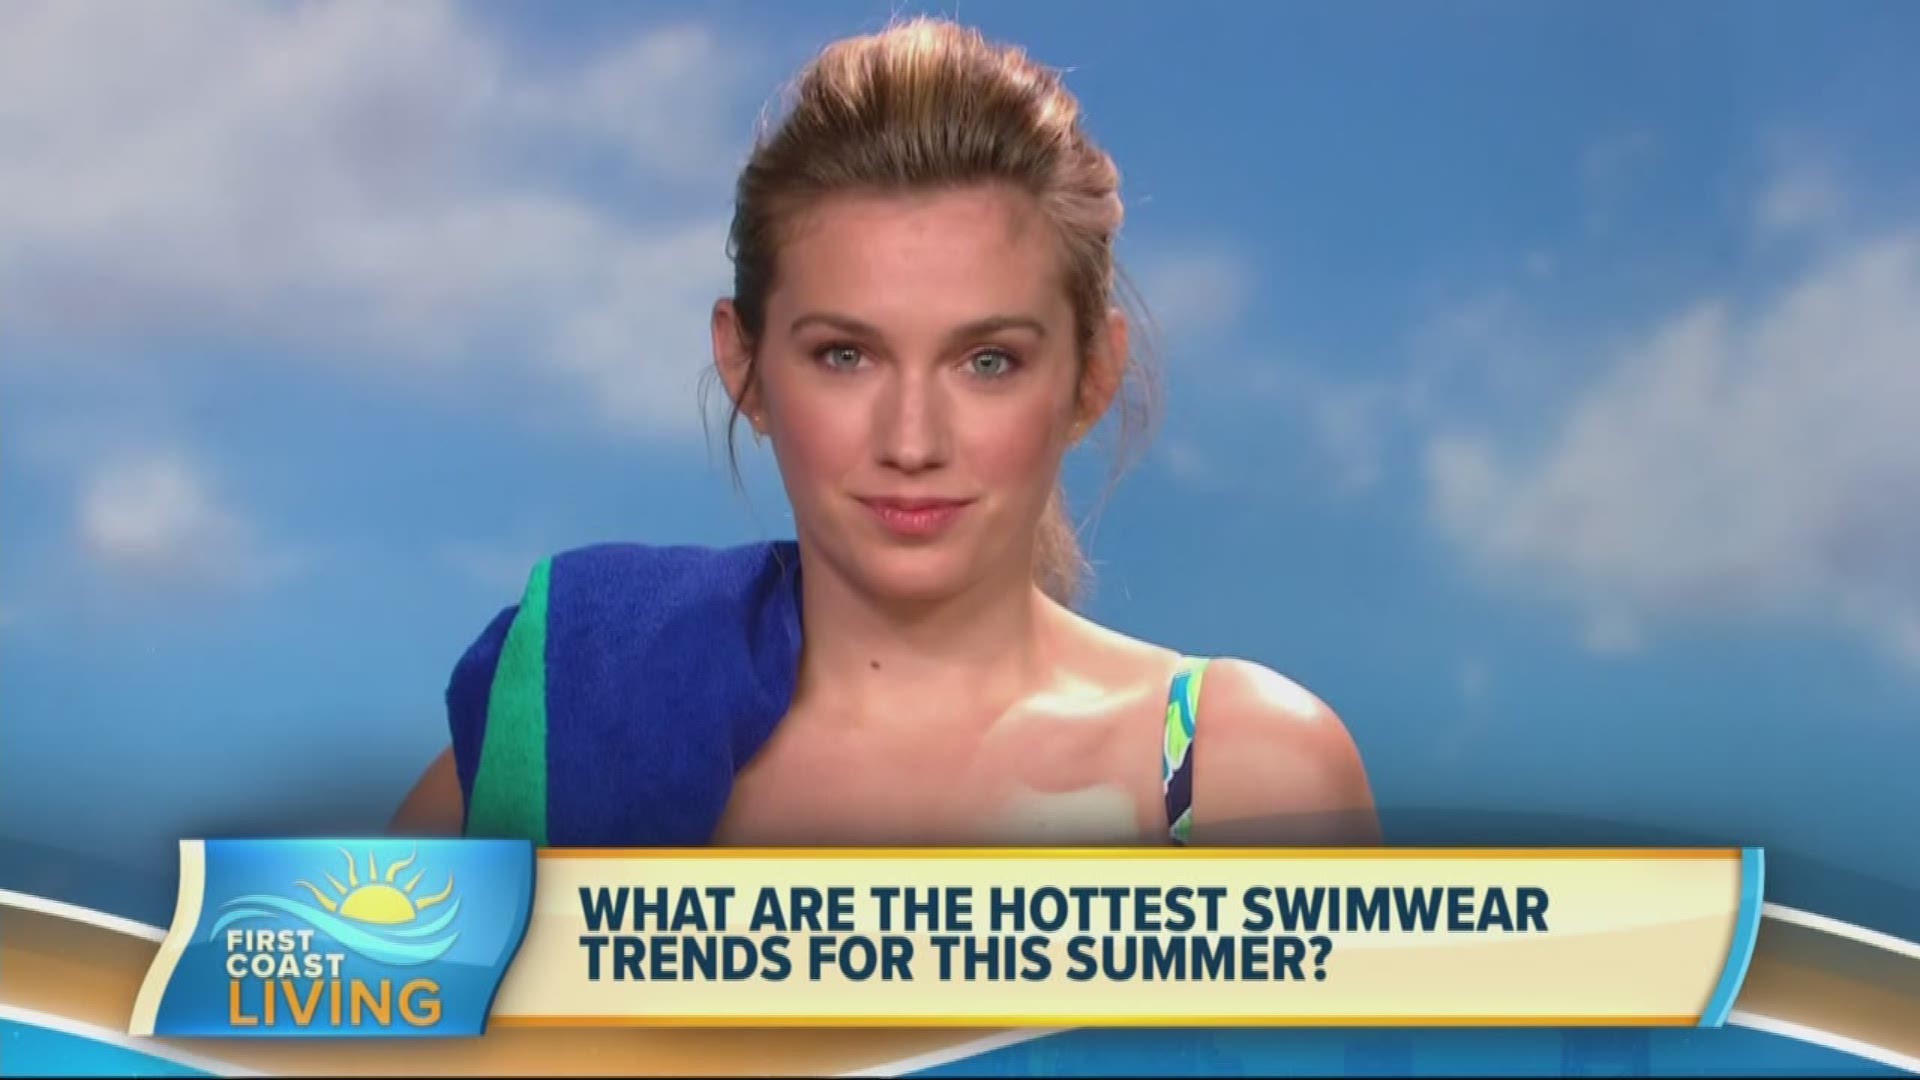 Style expert shares the hottest swimsuit trends for this season along with a promo code to get a discount on your next purchase.